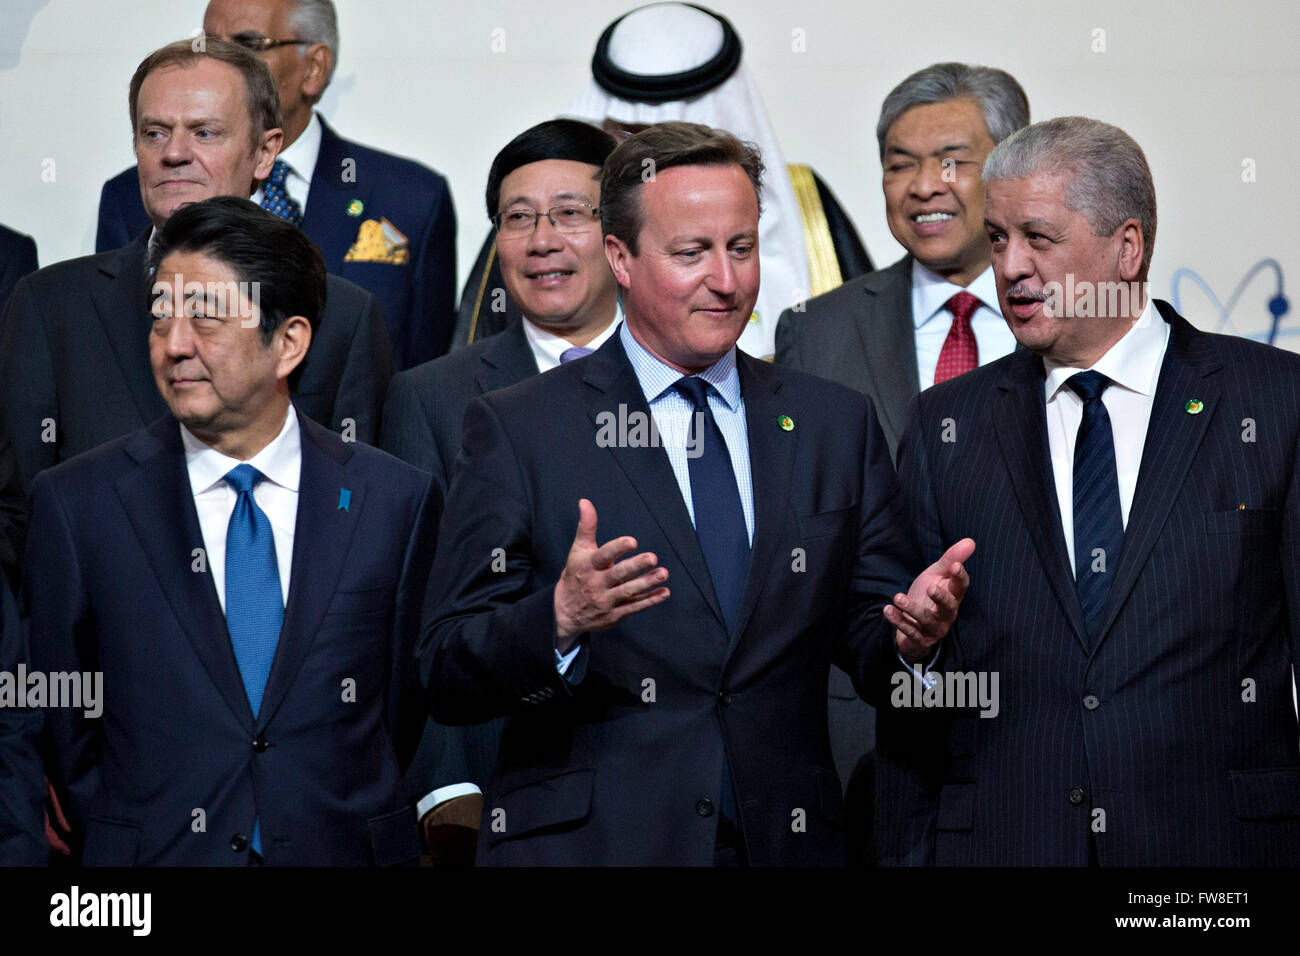 David Cameron, U.K. prime minister, center, talks to Abdelmalek Sellal, Algeria's prime minister, during a family photo with Shinzo Abe, Japan's prime minister, left, at the Nuclear Security Summit in Washington, DC, U.S., on Friday, April 1, 2016. After a spate of terrorist attacks from Europe to Africa, U.S. President Barack Obama is rallying international support during the summit for an effort to keep Islamic State and similar groups from obtaining nuclear material and other weapons of mass destruction. Credit: Andrew Harrer/Pool via CNP - NO WIRE SERVICE - Stock Photo